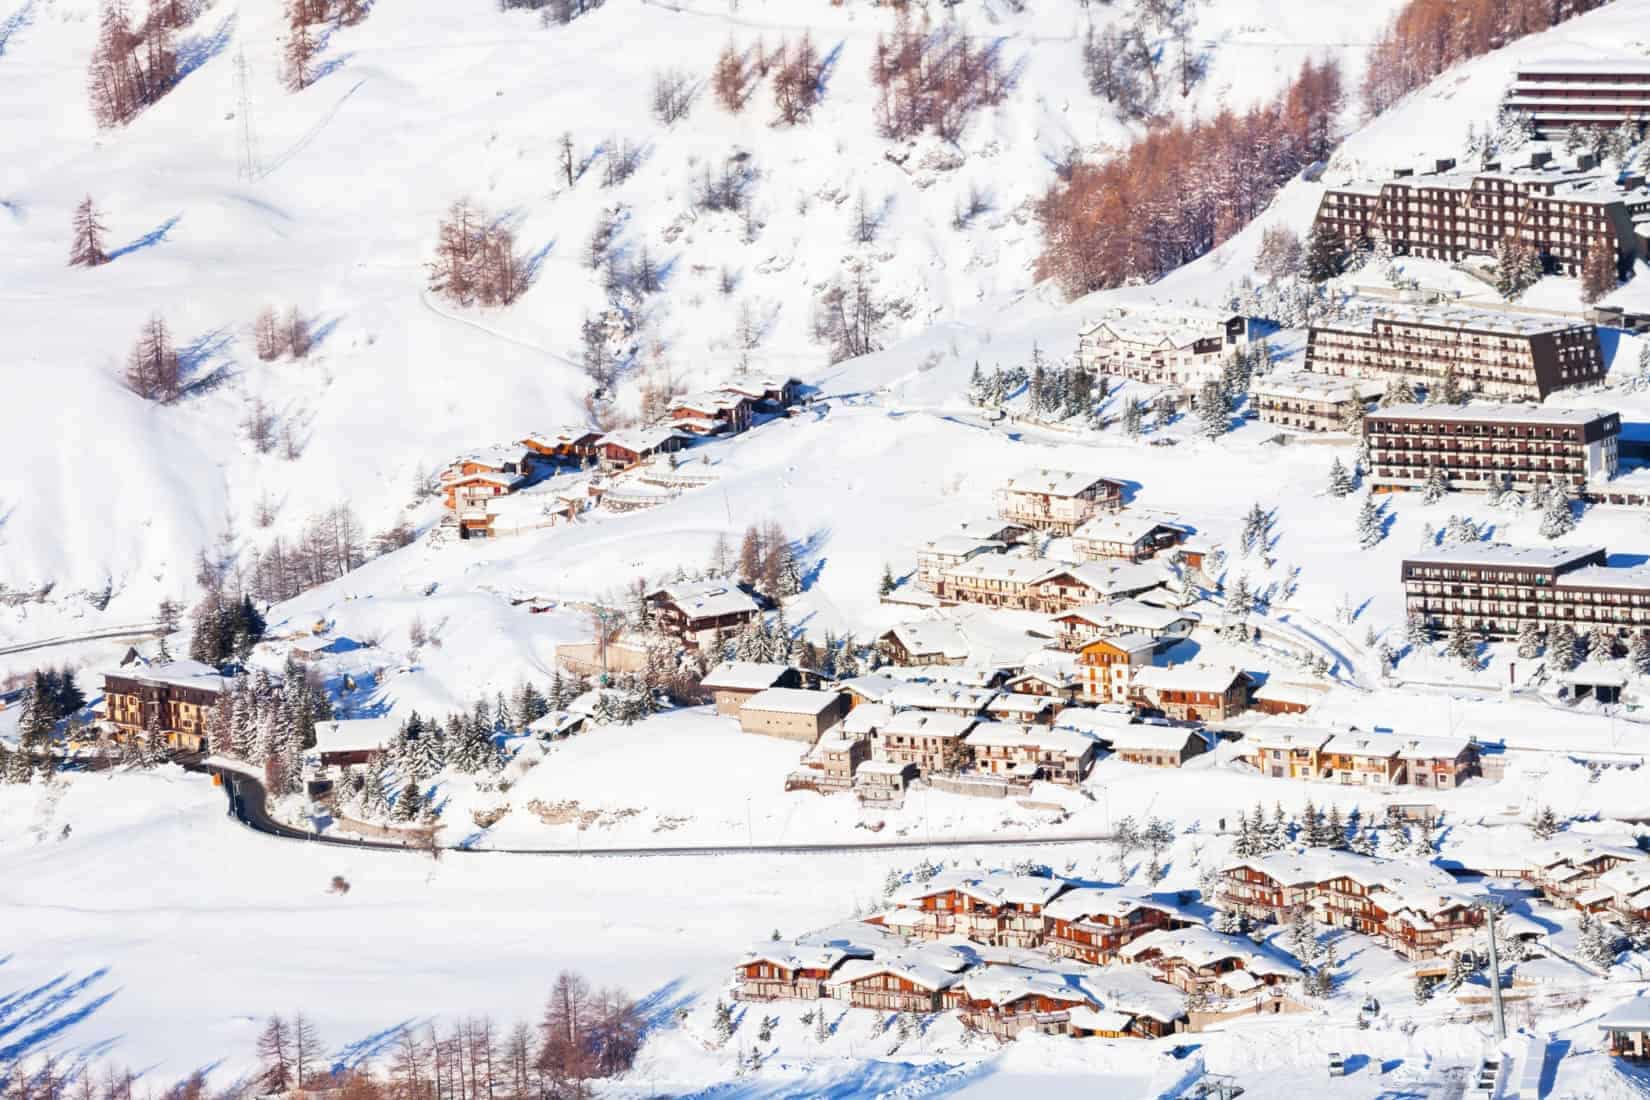 Sestriere village from above